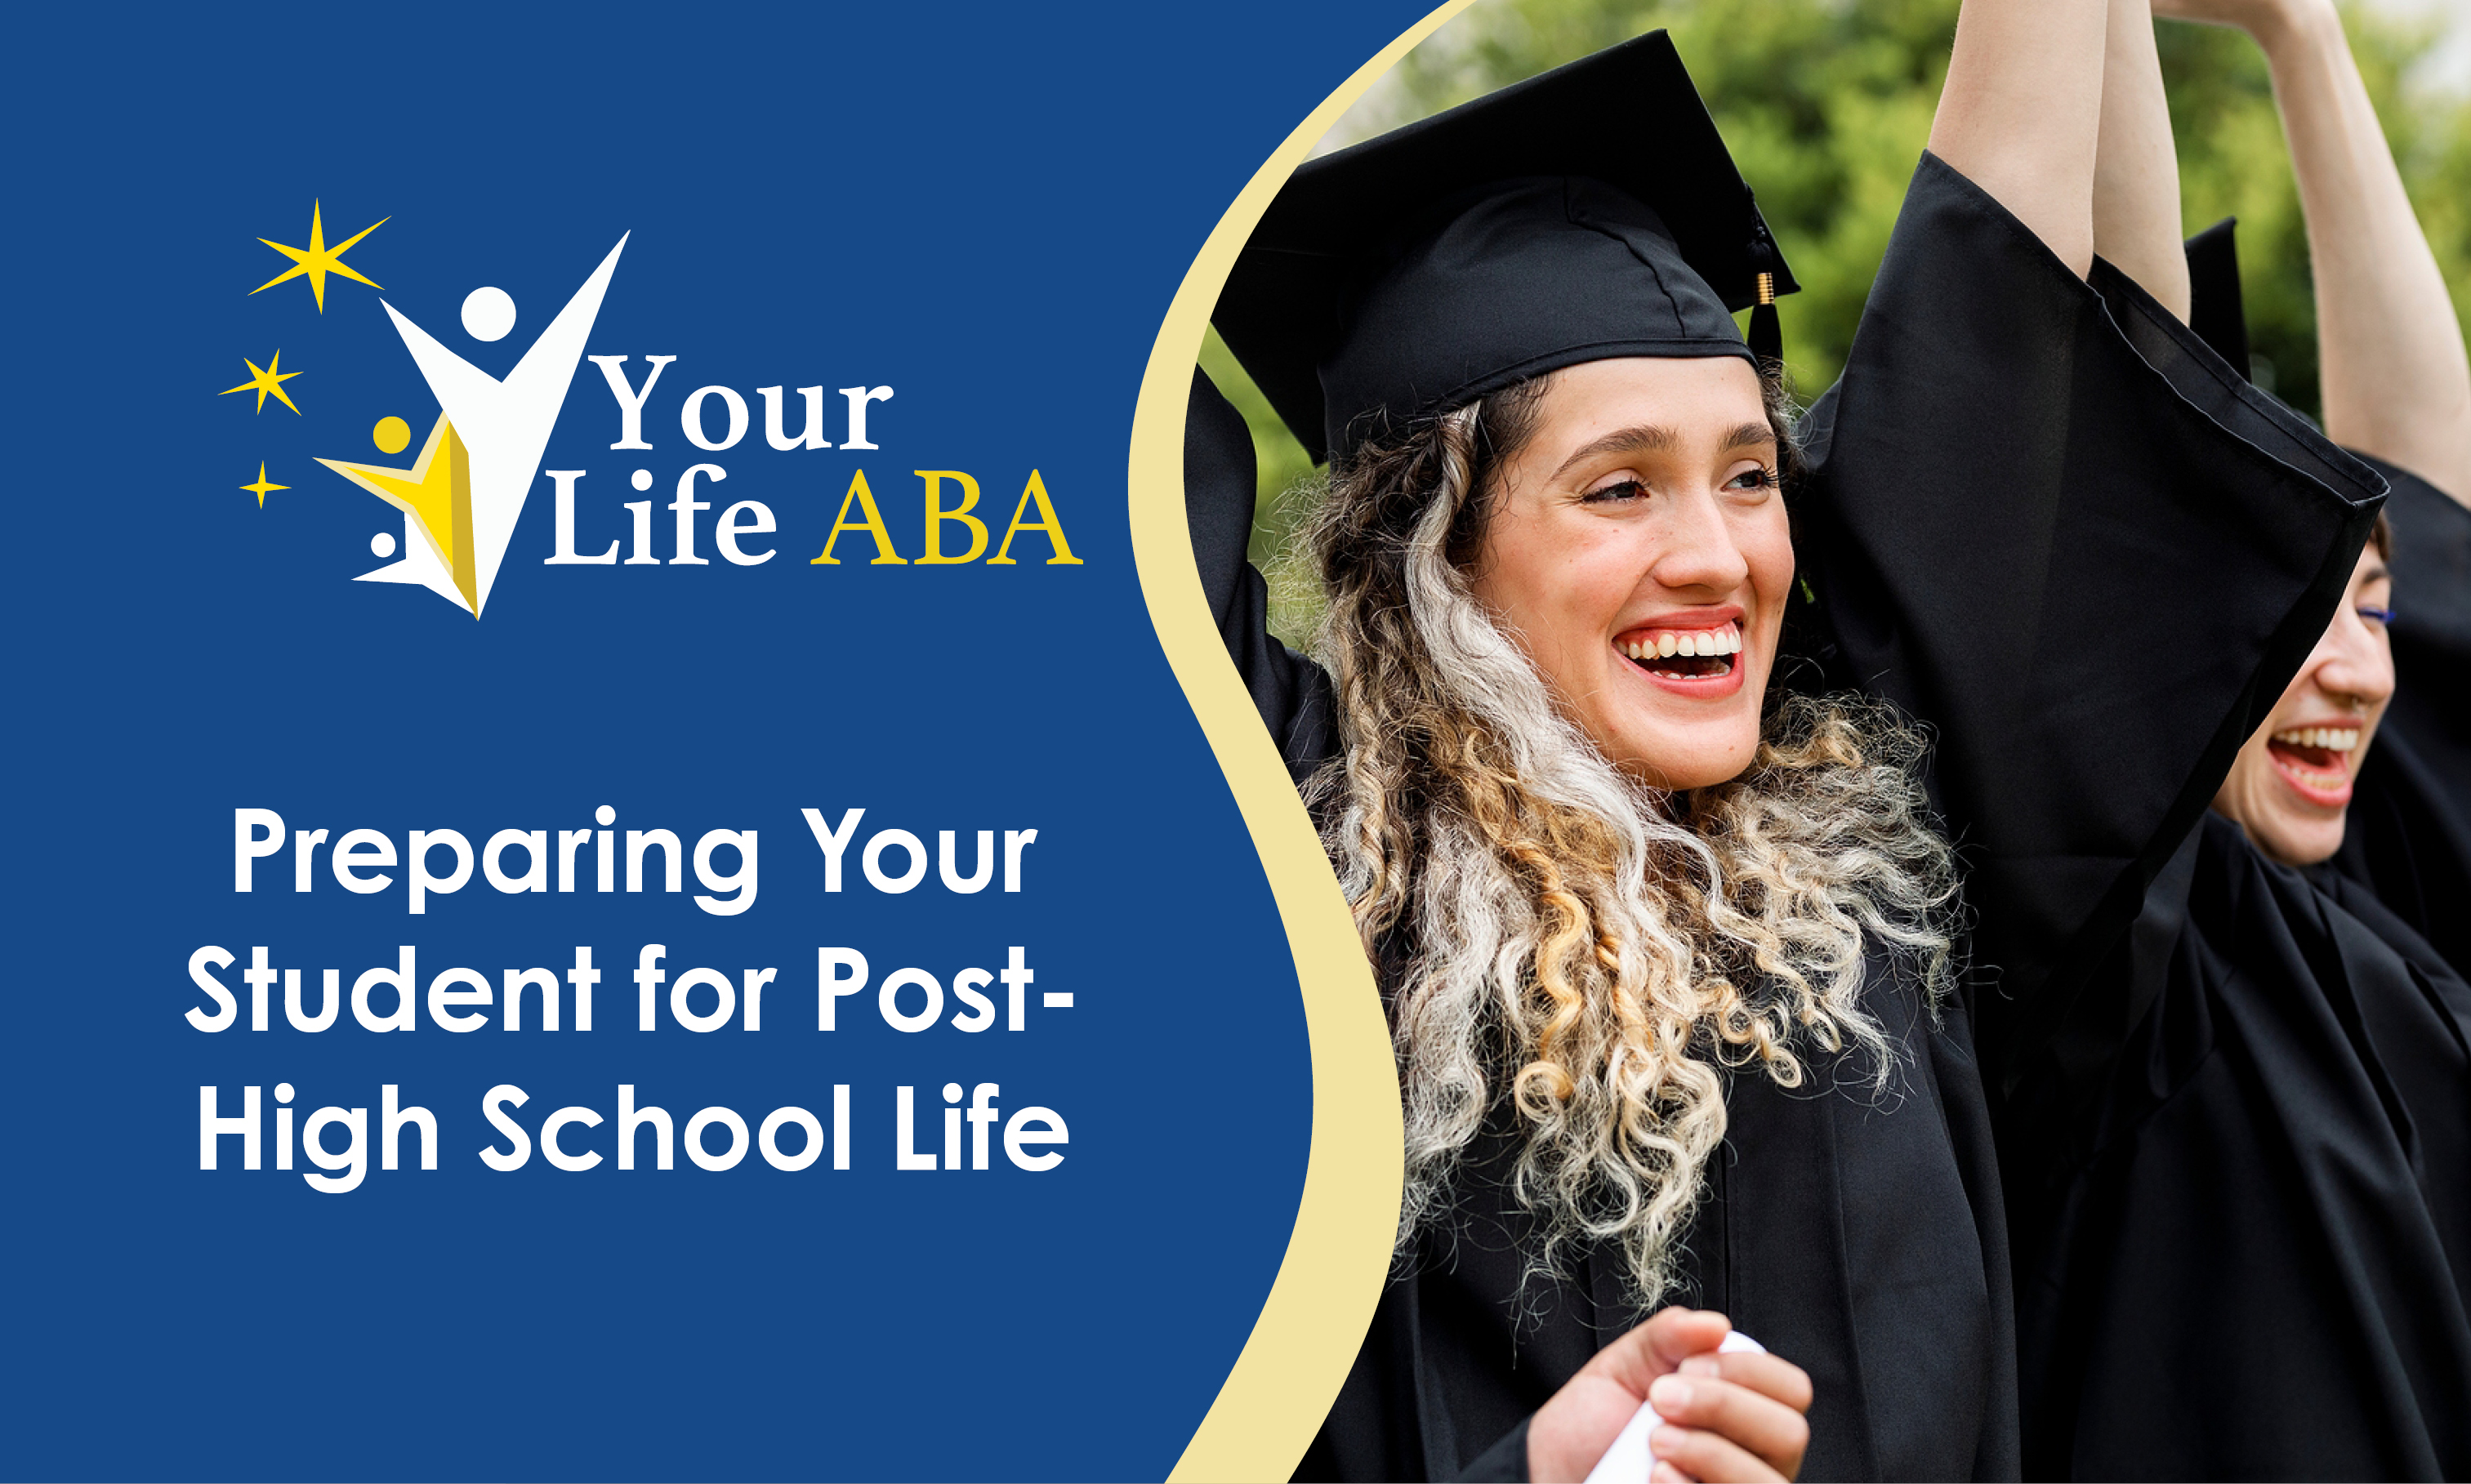 Preparing your student for post-high school life